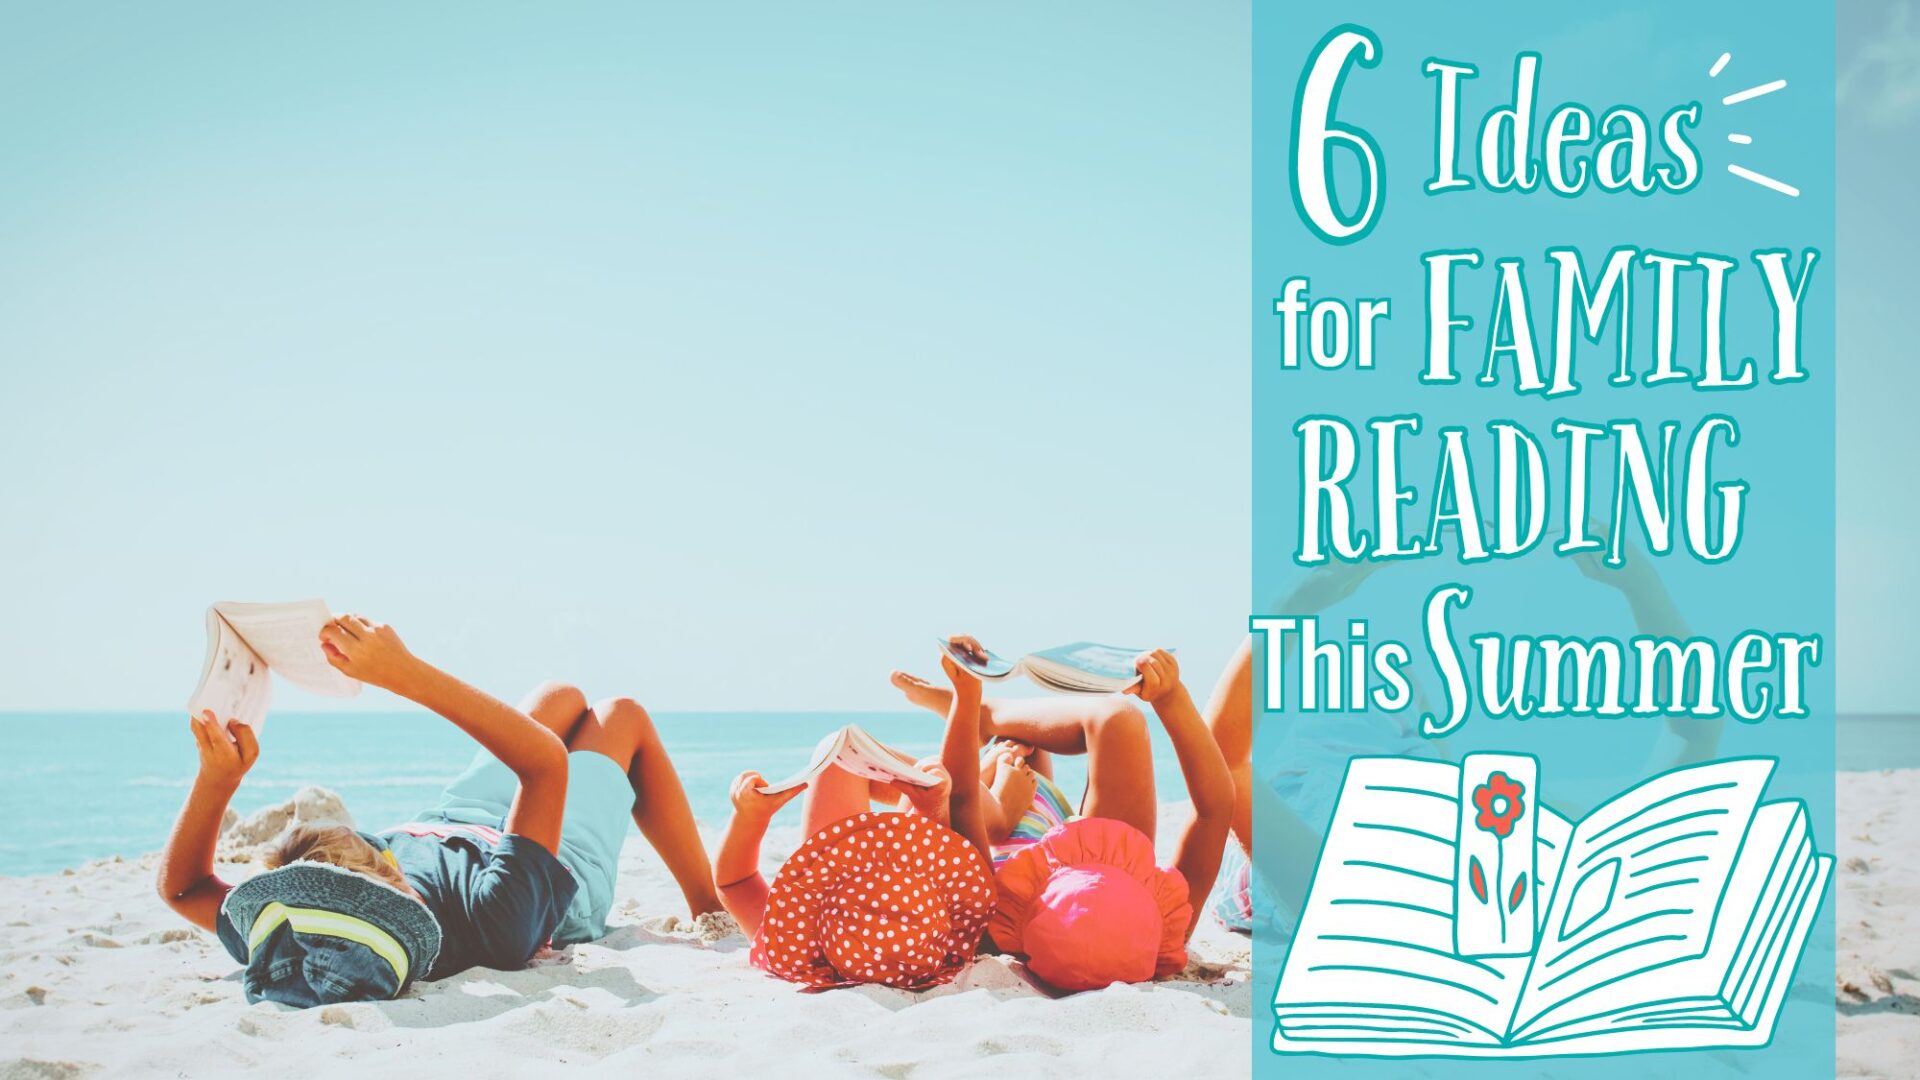 You are currently viewing 6 Fun Ideas to Keep the Whole Family Reading This Summer